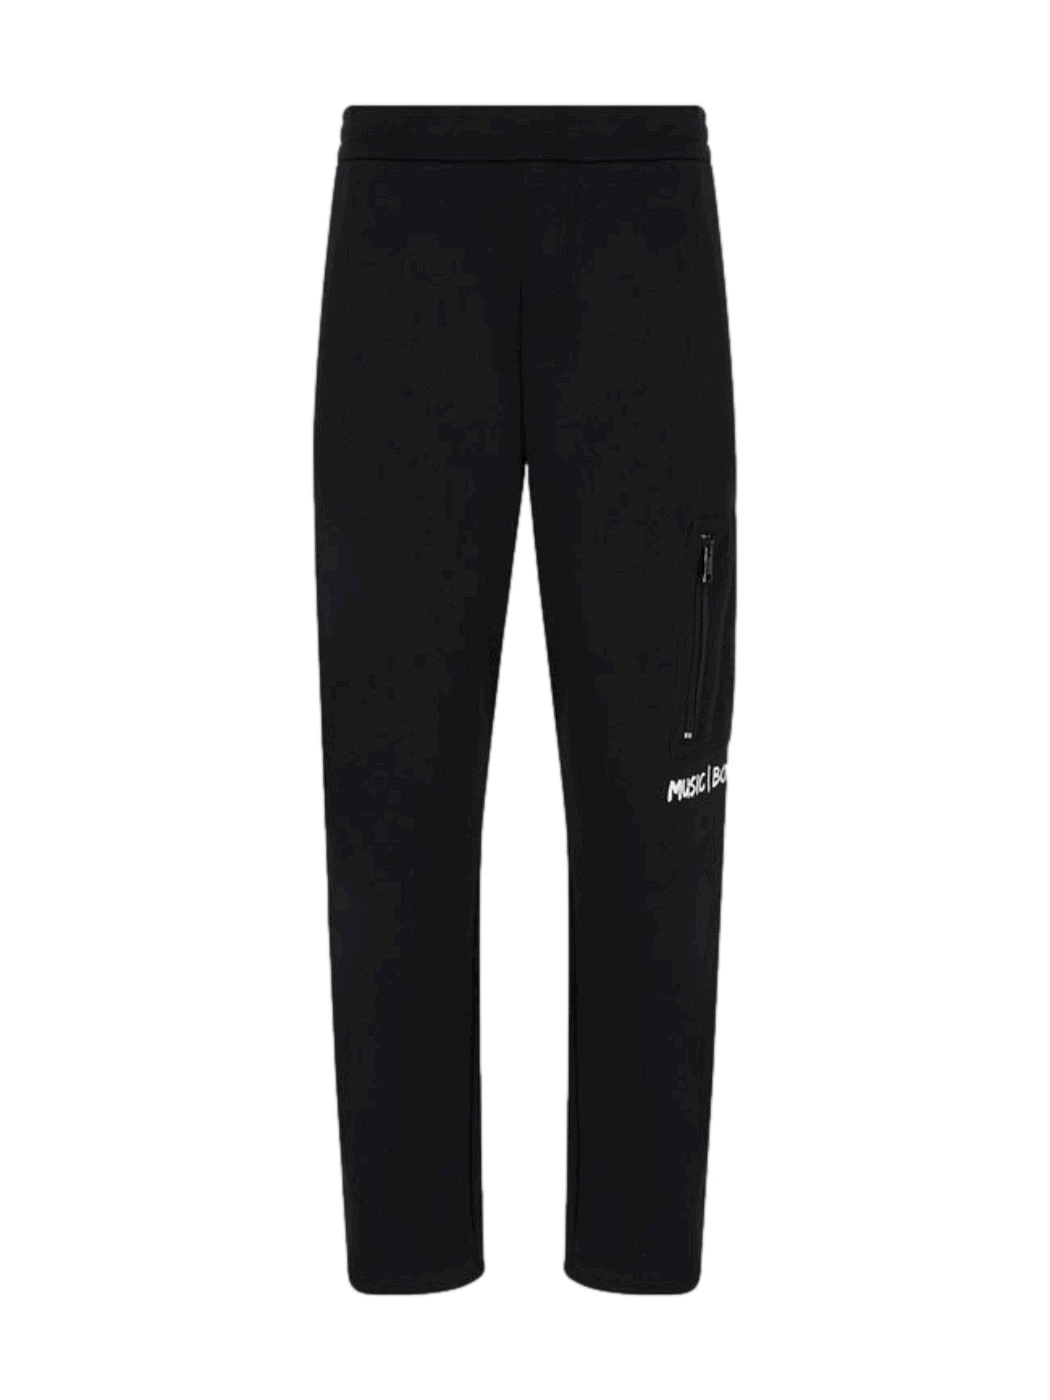 Sports pants with Armani Exchange applied pocket